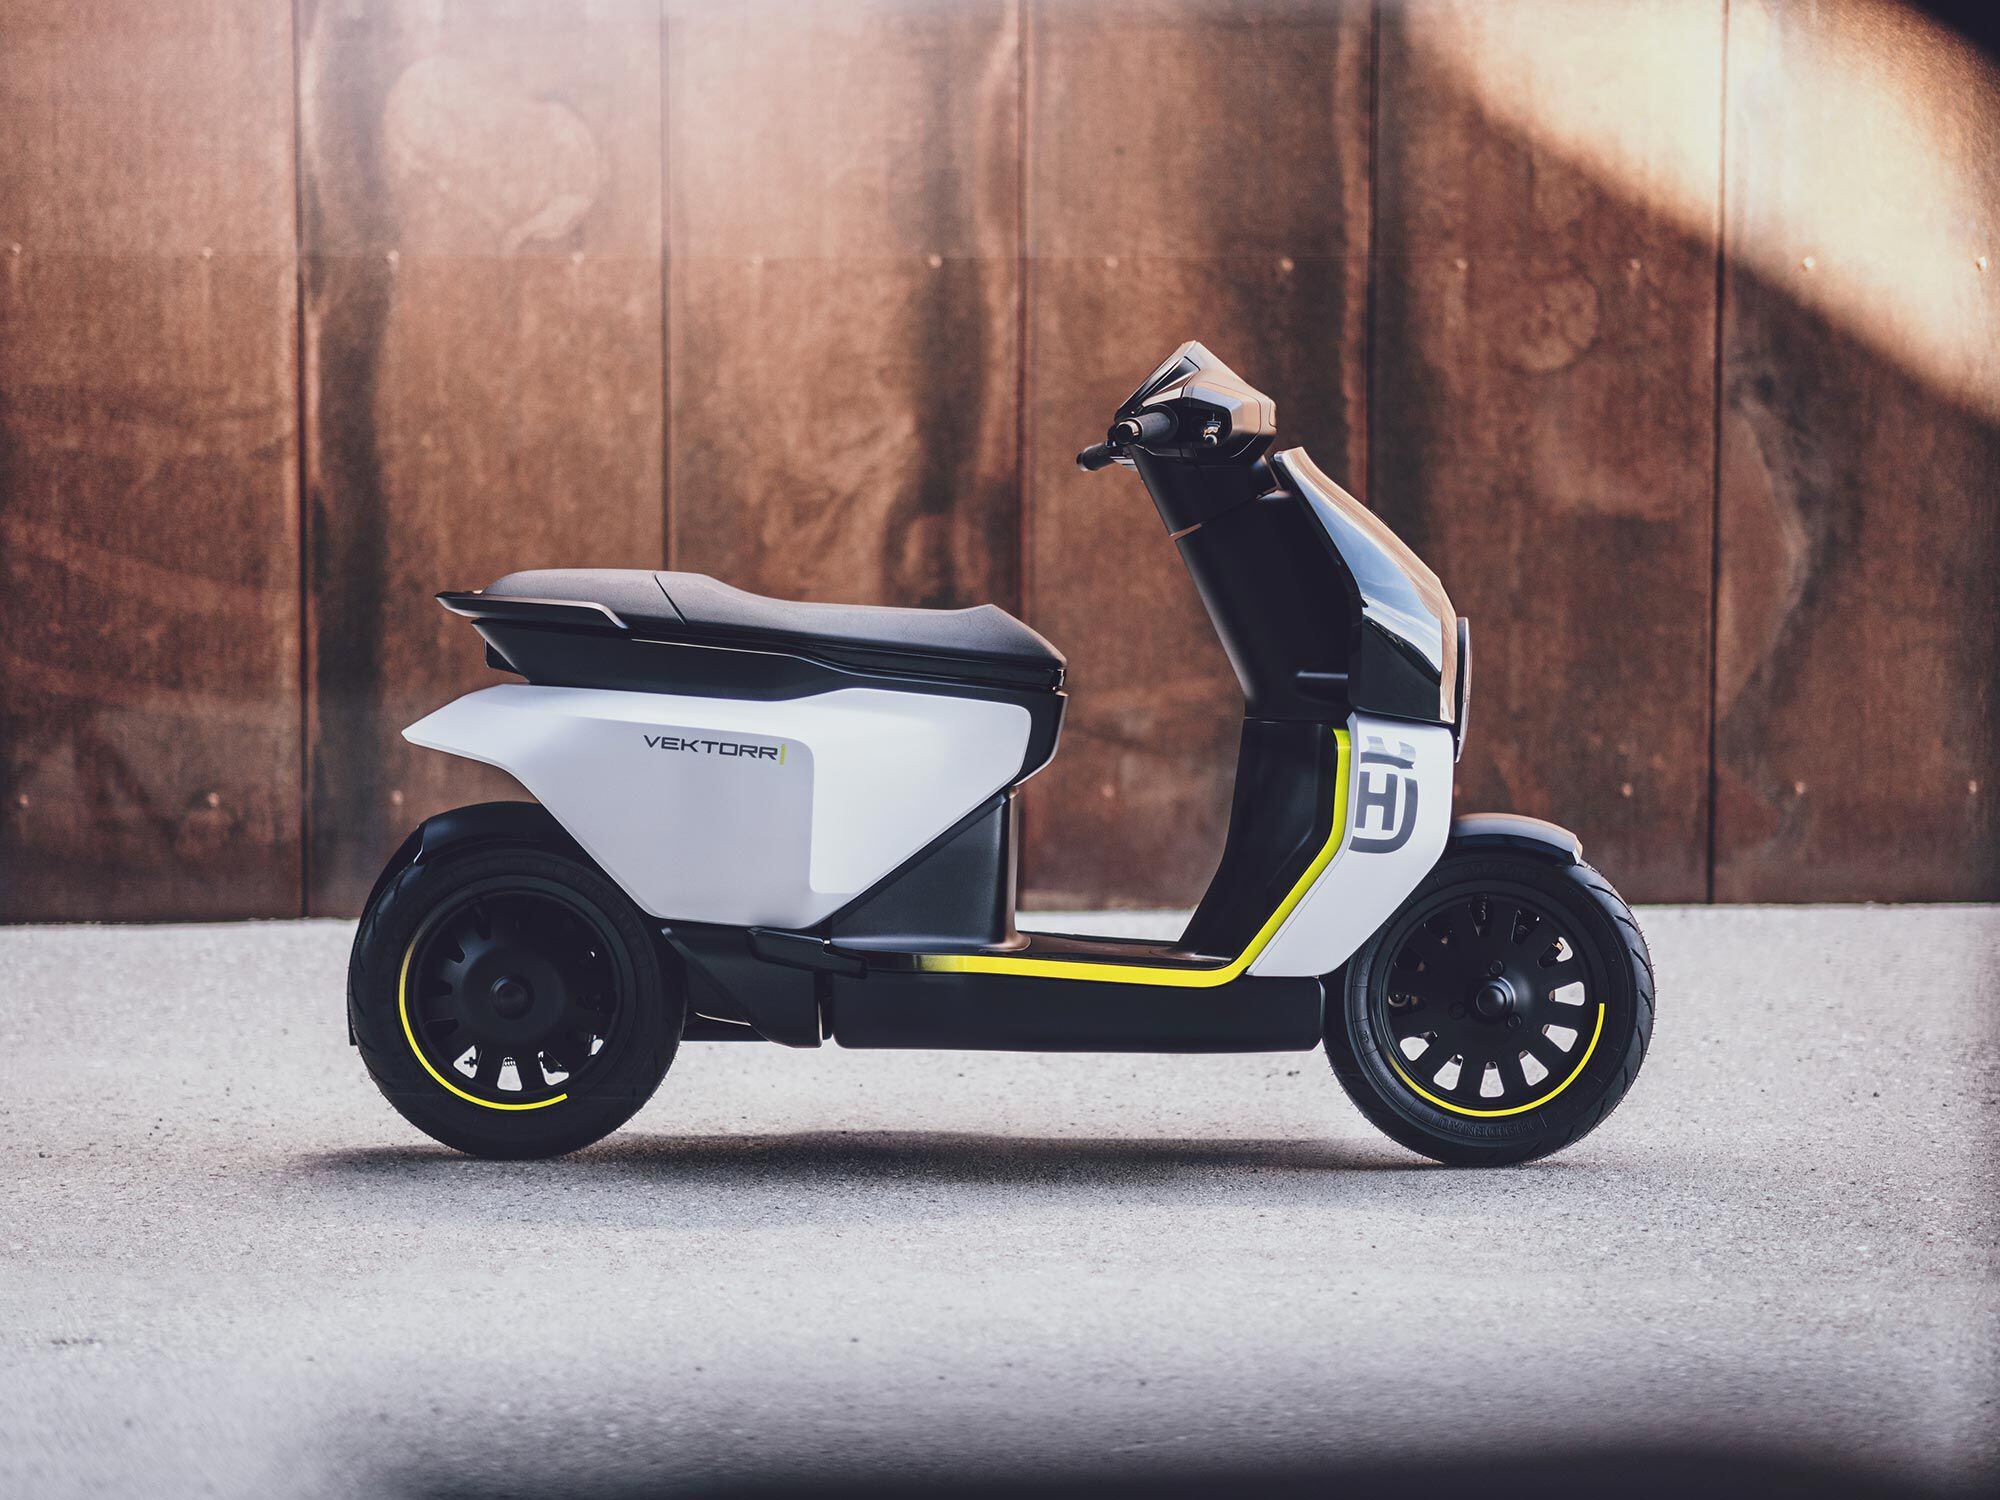 Husqvarna is targeting eco-conscious urban riders hard with its growing emobility line.